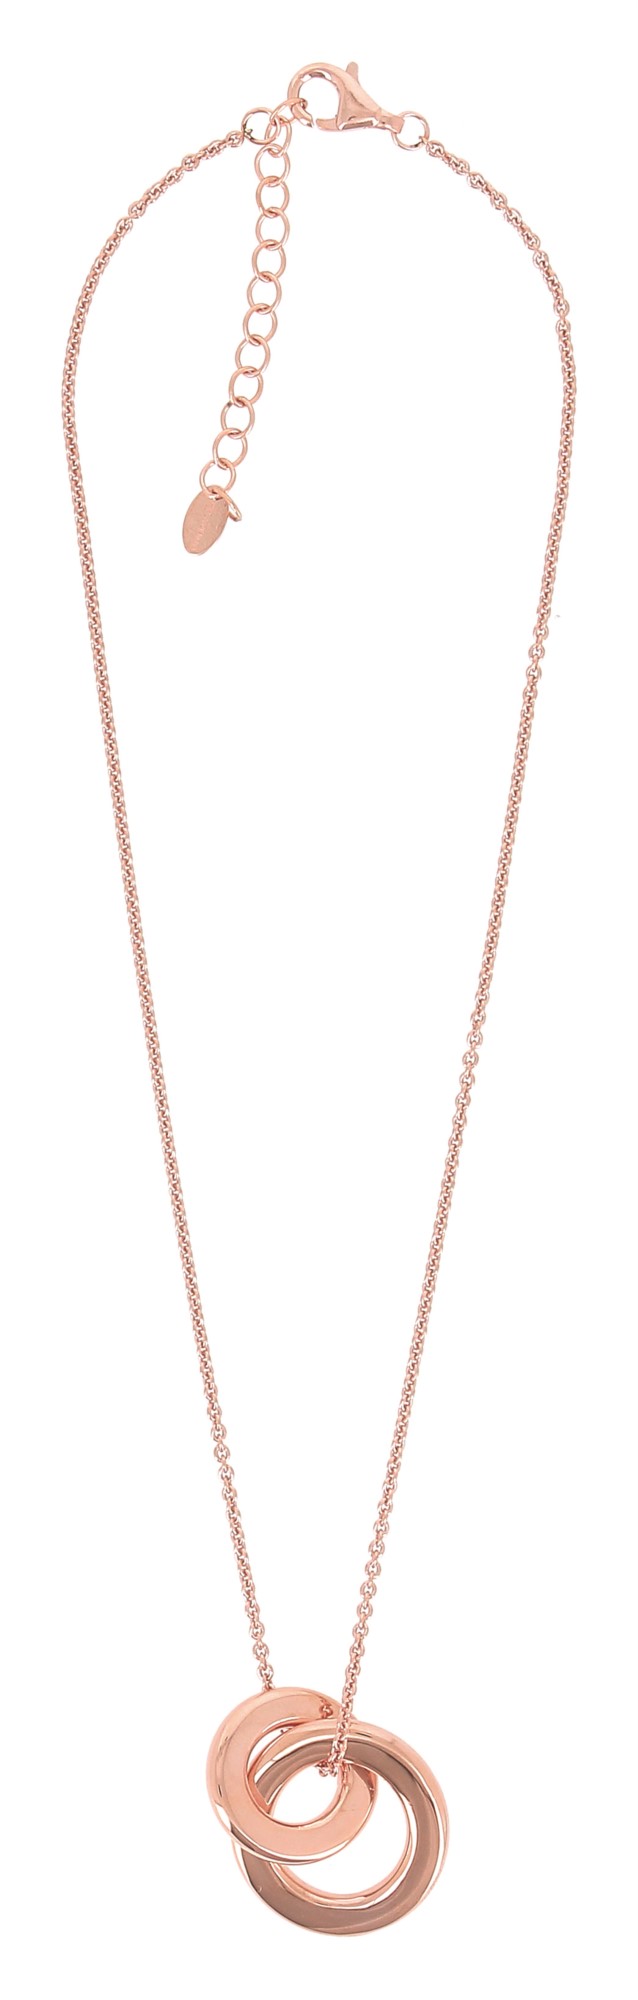 Contemporary Pendant  Women   Polished Necklace WELGE016